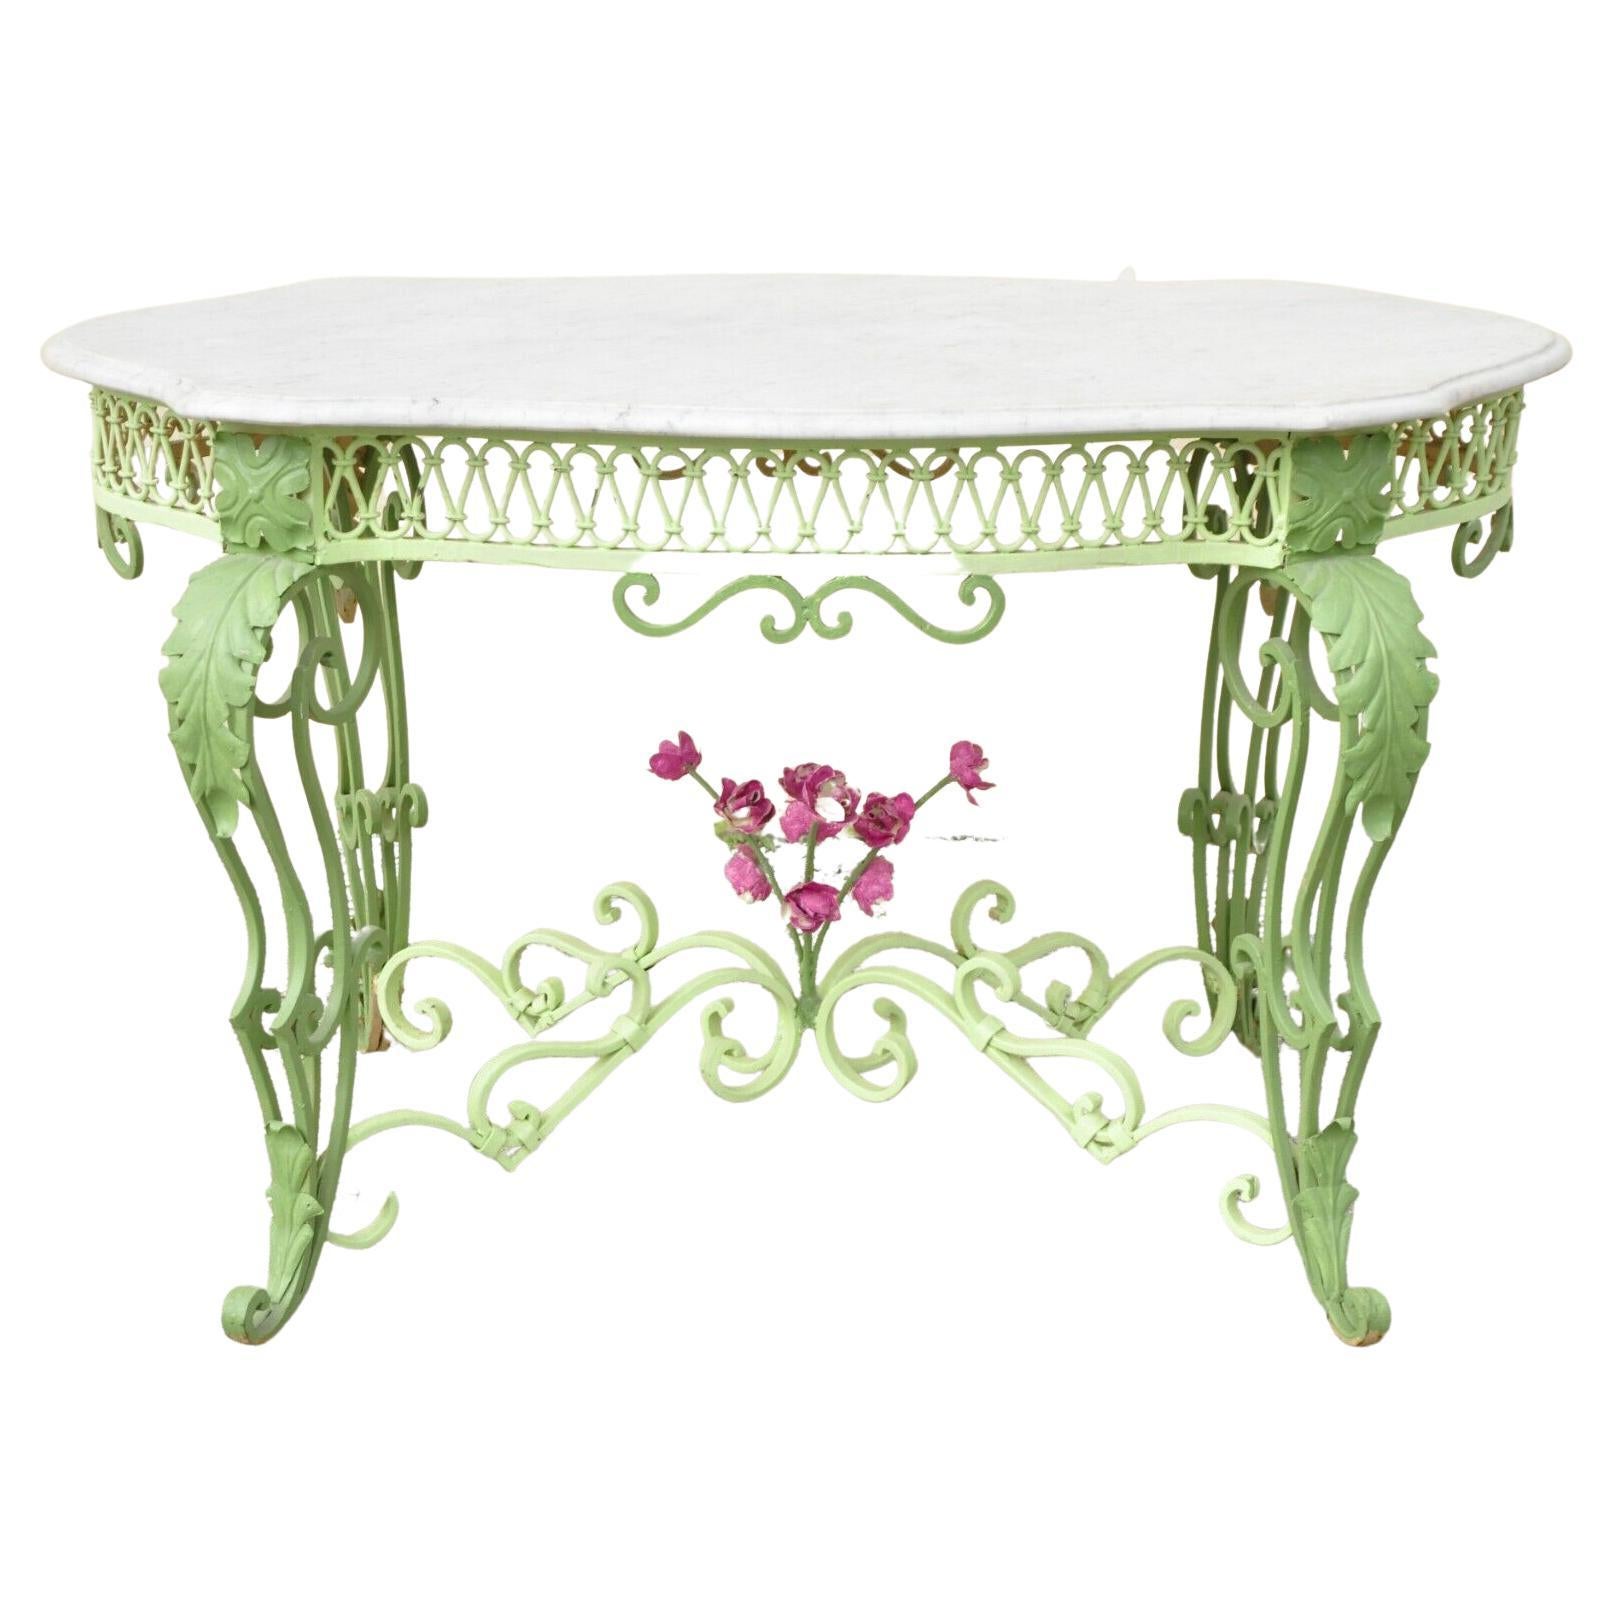 Antique French Art Nouveau Wrought Iron Marble Turtle Top Console Center Table For Sale